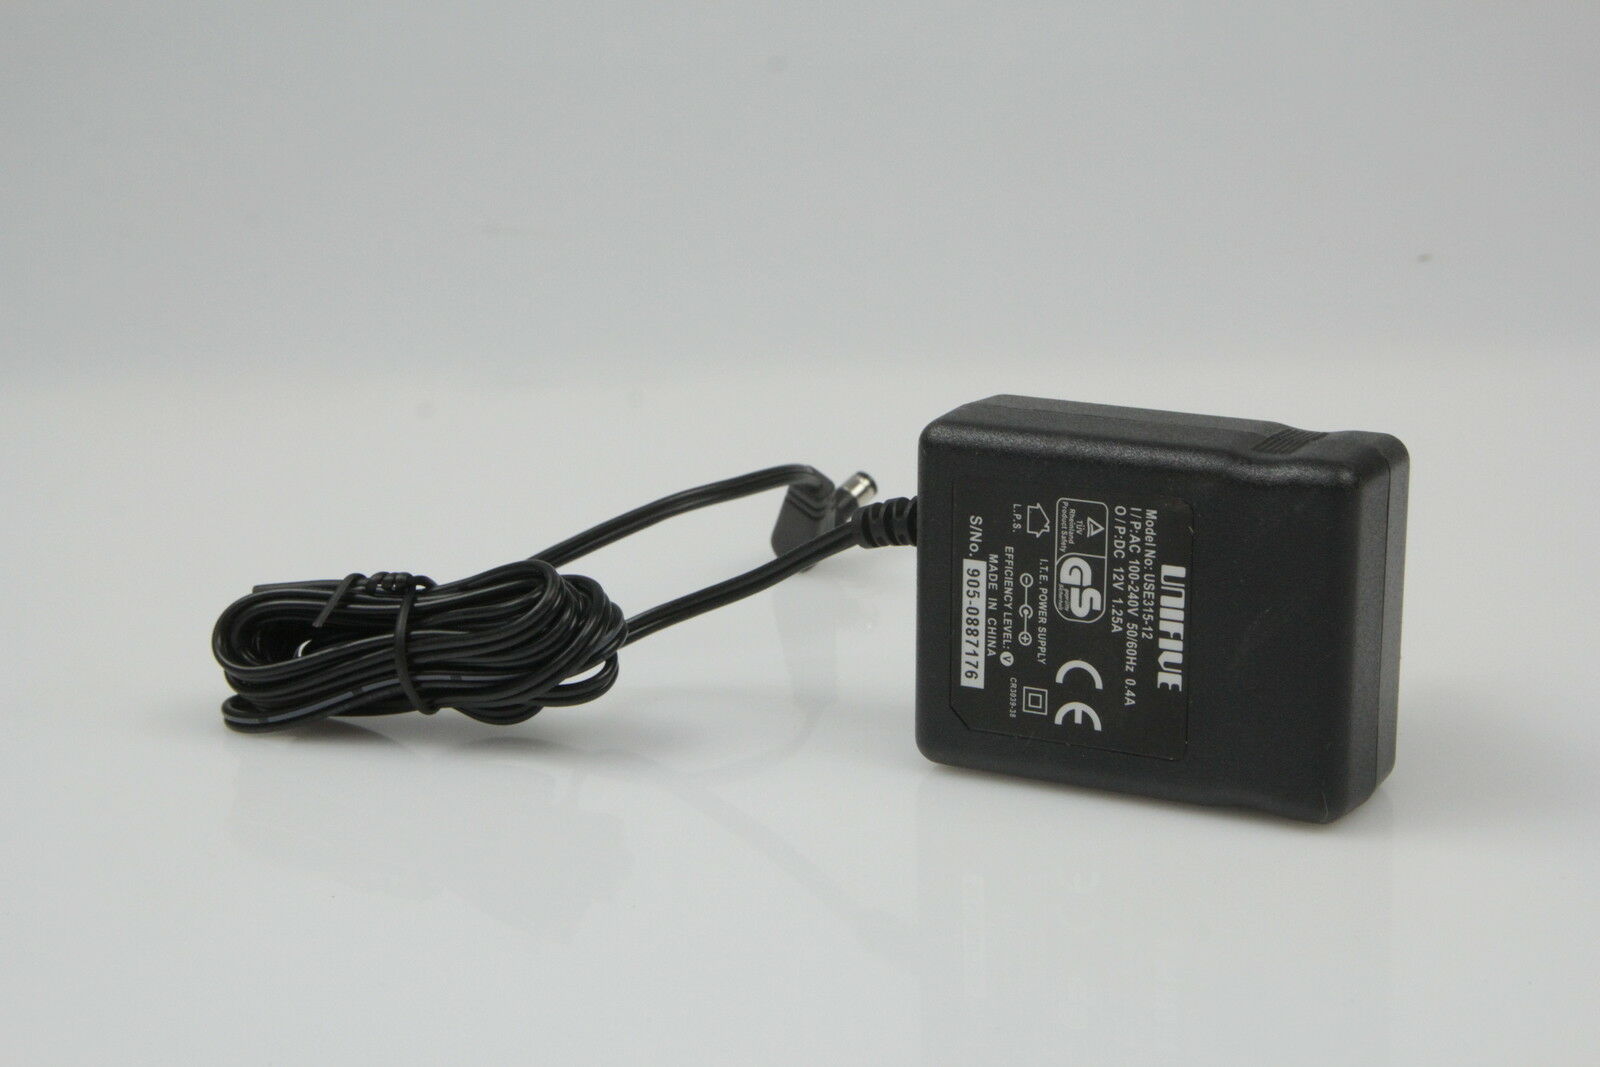 New 12V 1.25A UniFive UI315-12 AC to DC Adapter Power Supply